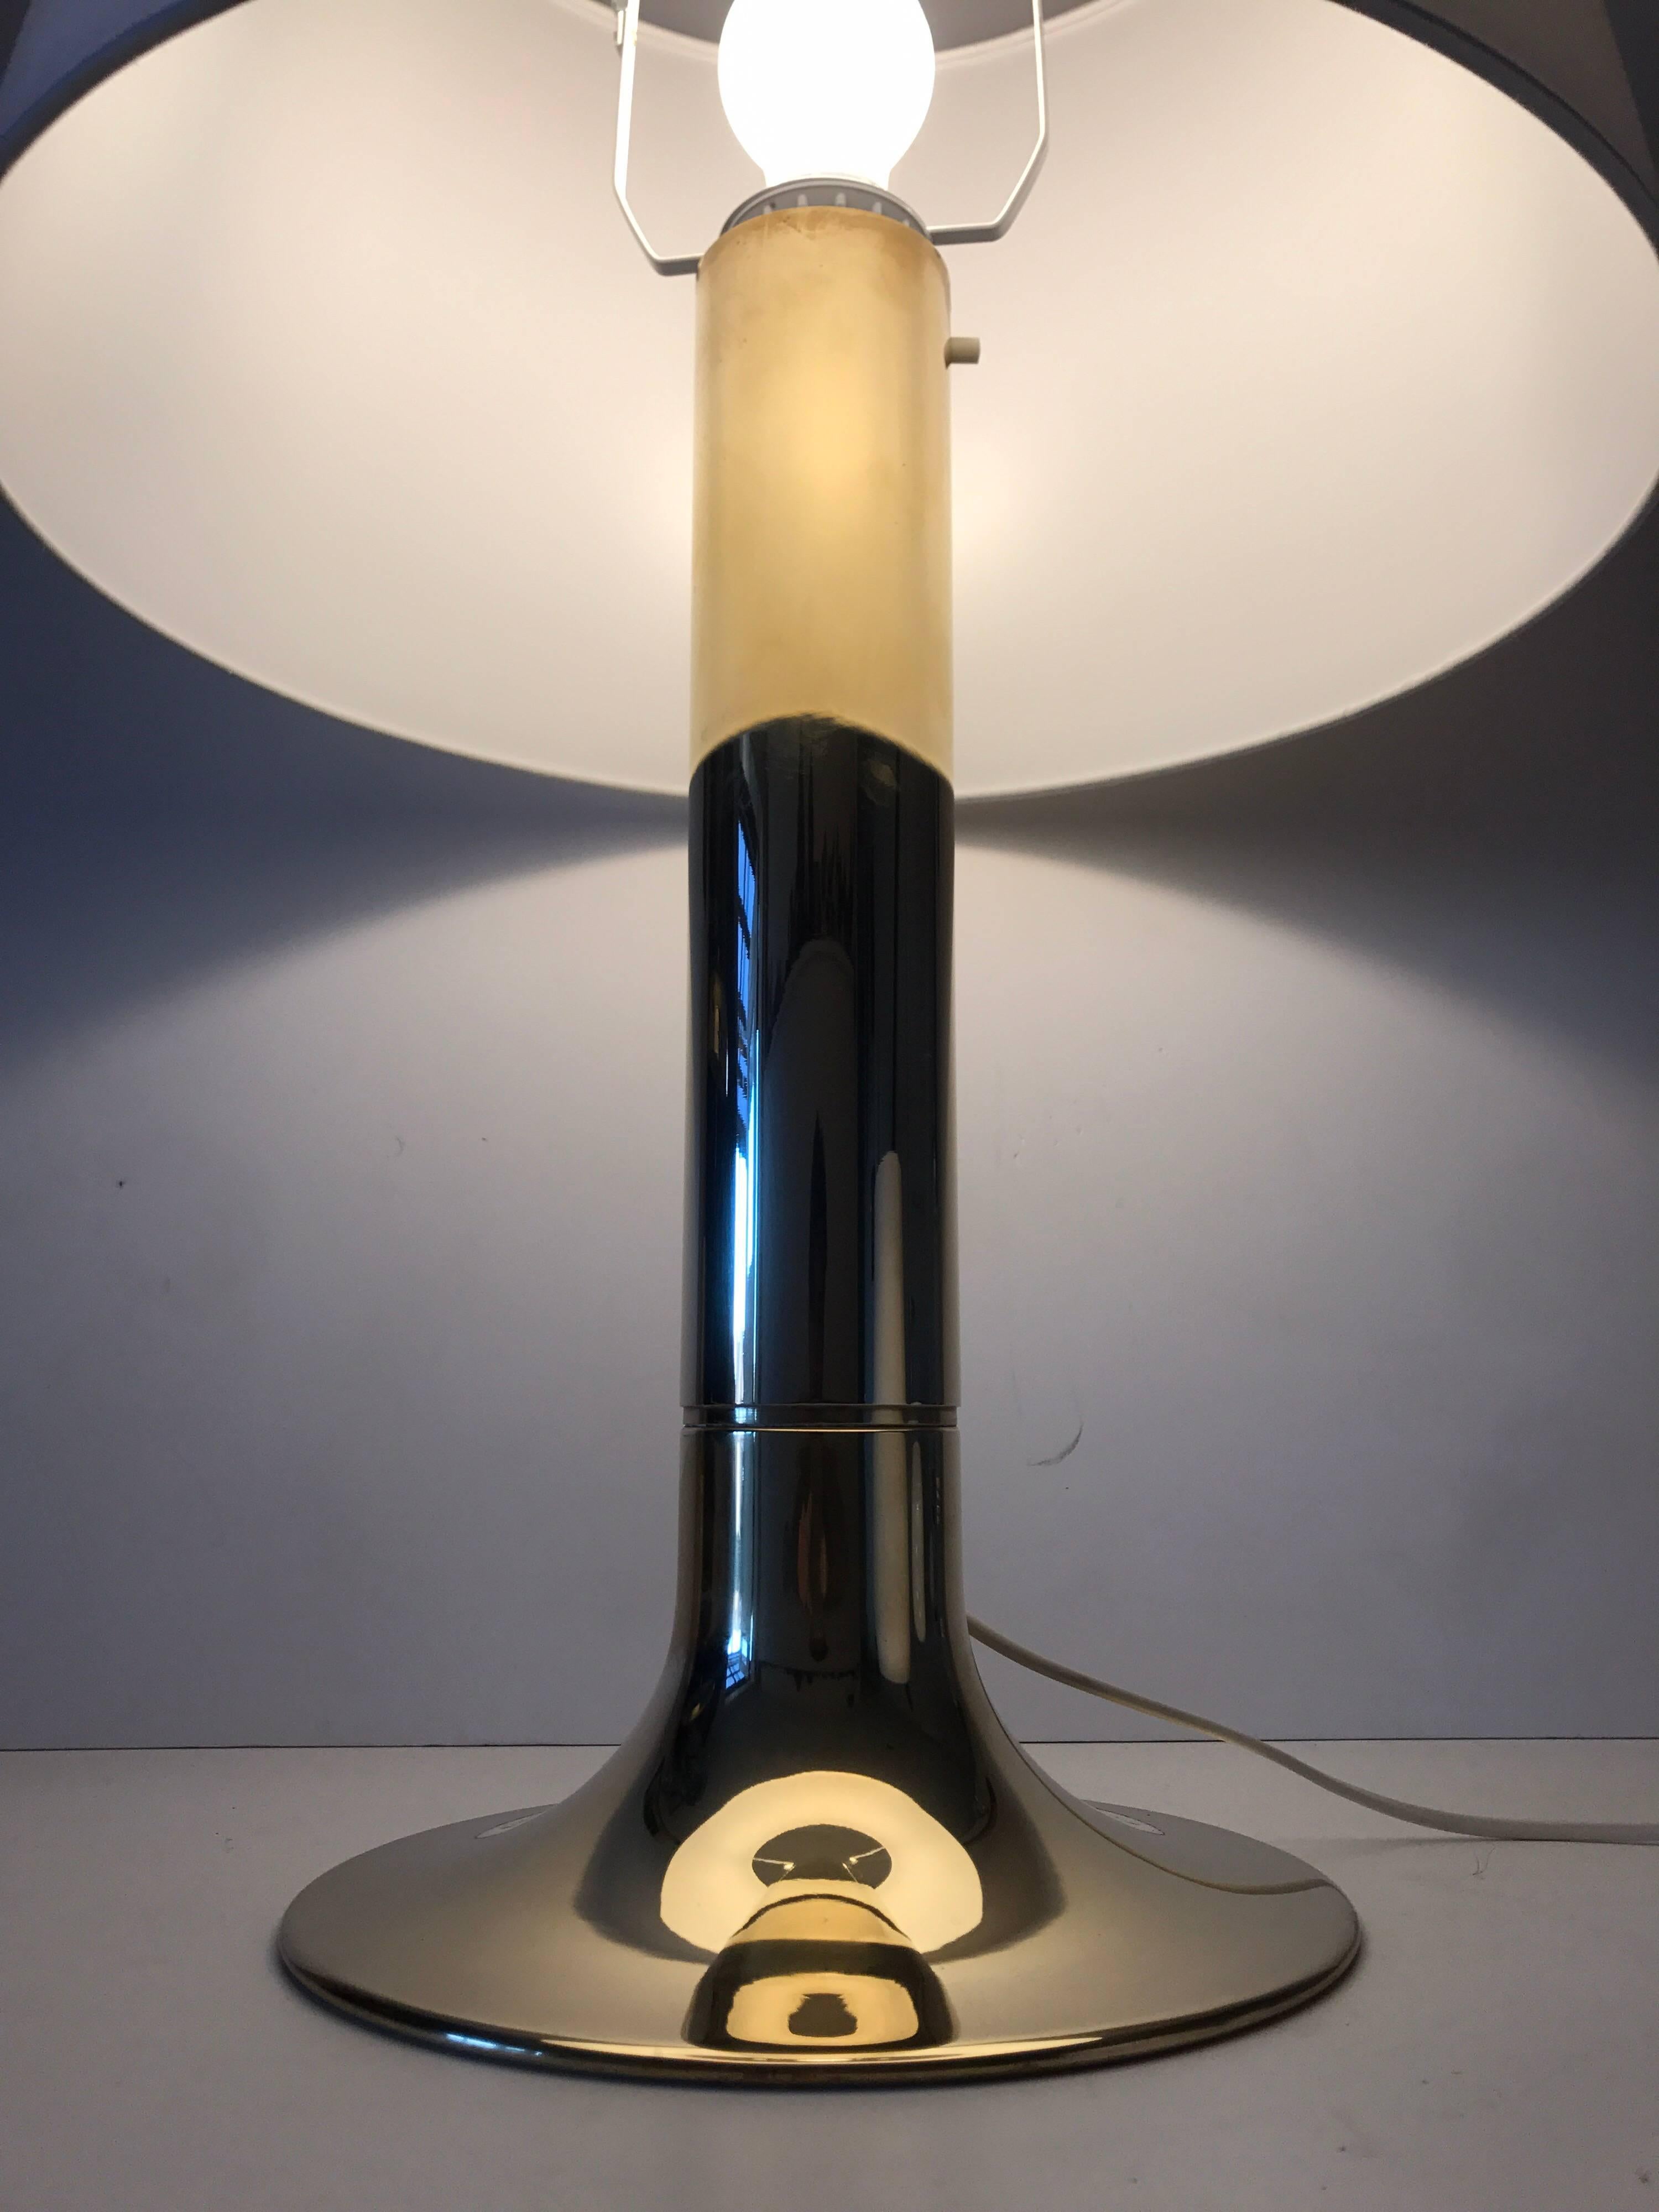 Large Swedish 1960 Hans Agne Jakobsson brass table lamp.
A very large and beautiful polished brass table lamp designed by the great Hans Agne Jakobsson. This lamp is in a very nice condition and it measures 63 cm with the shade and the base